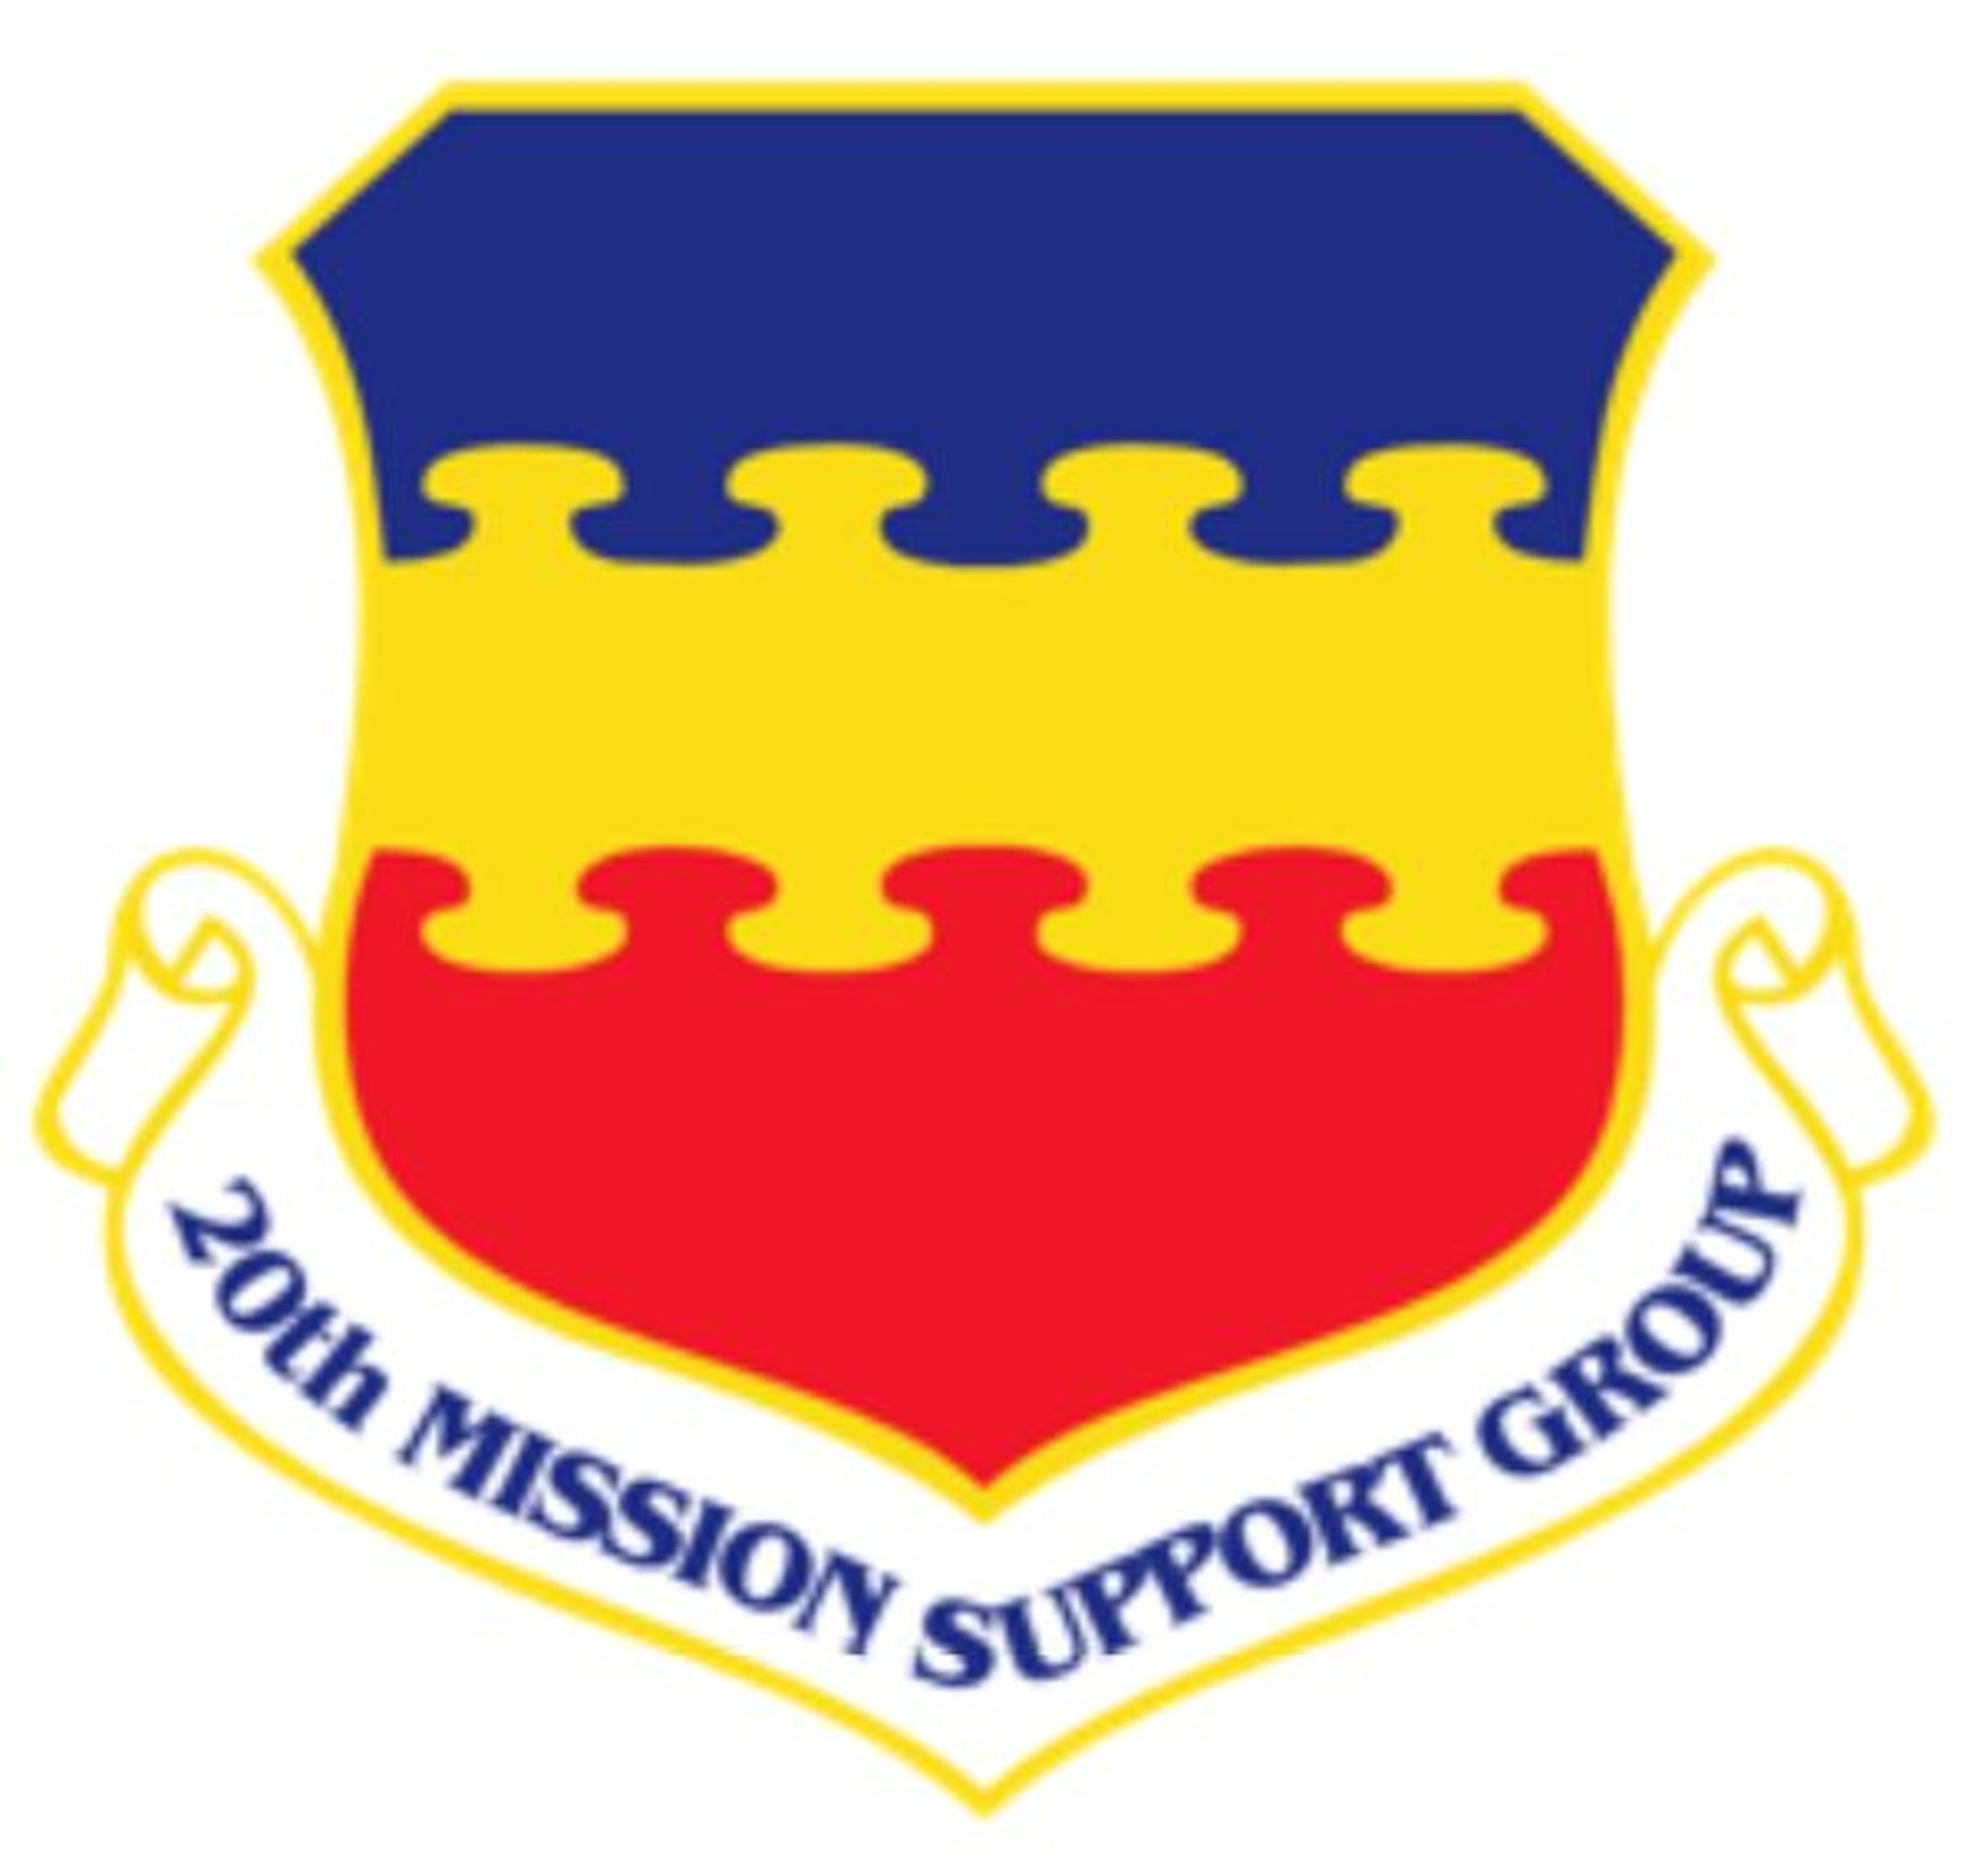 Graphic emblem of the 20th Mission Support Group